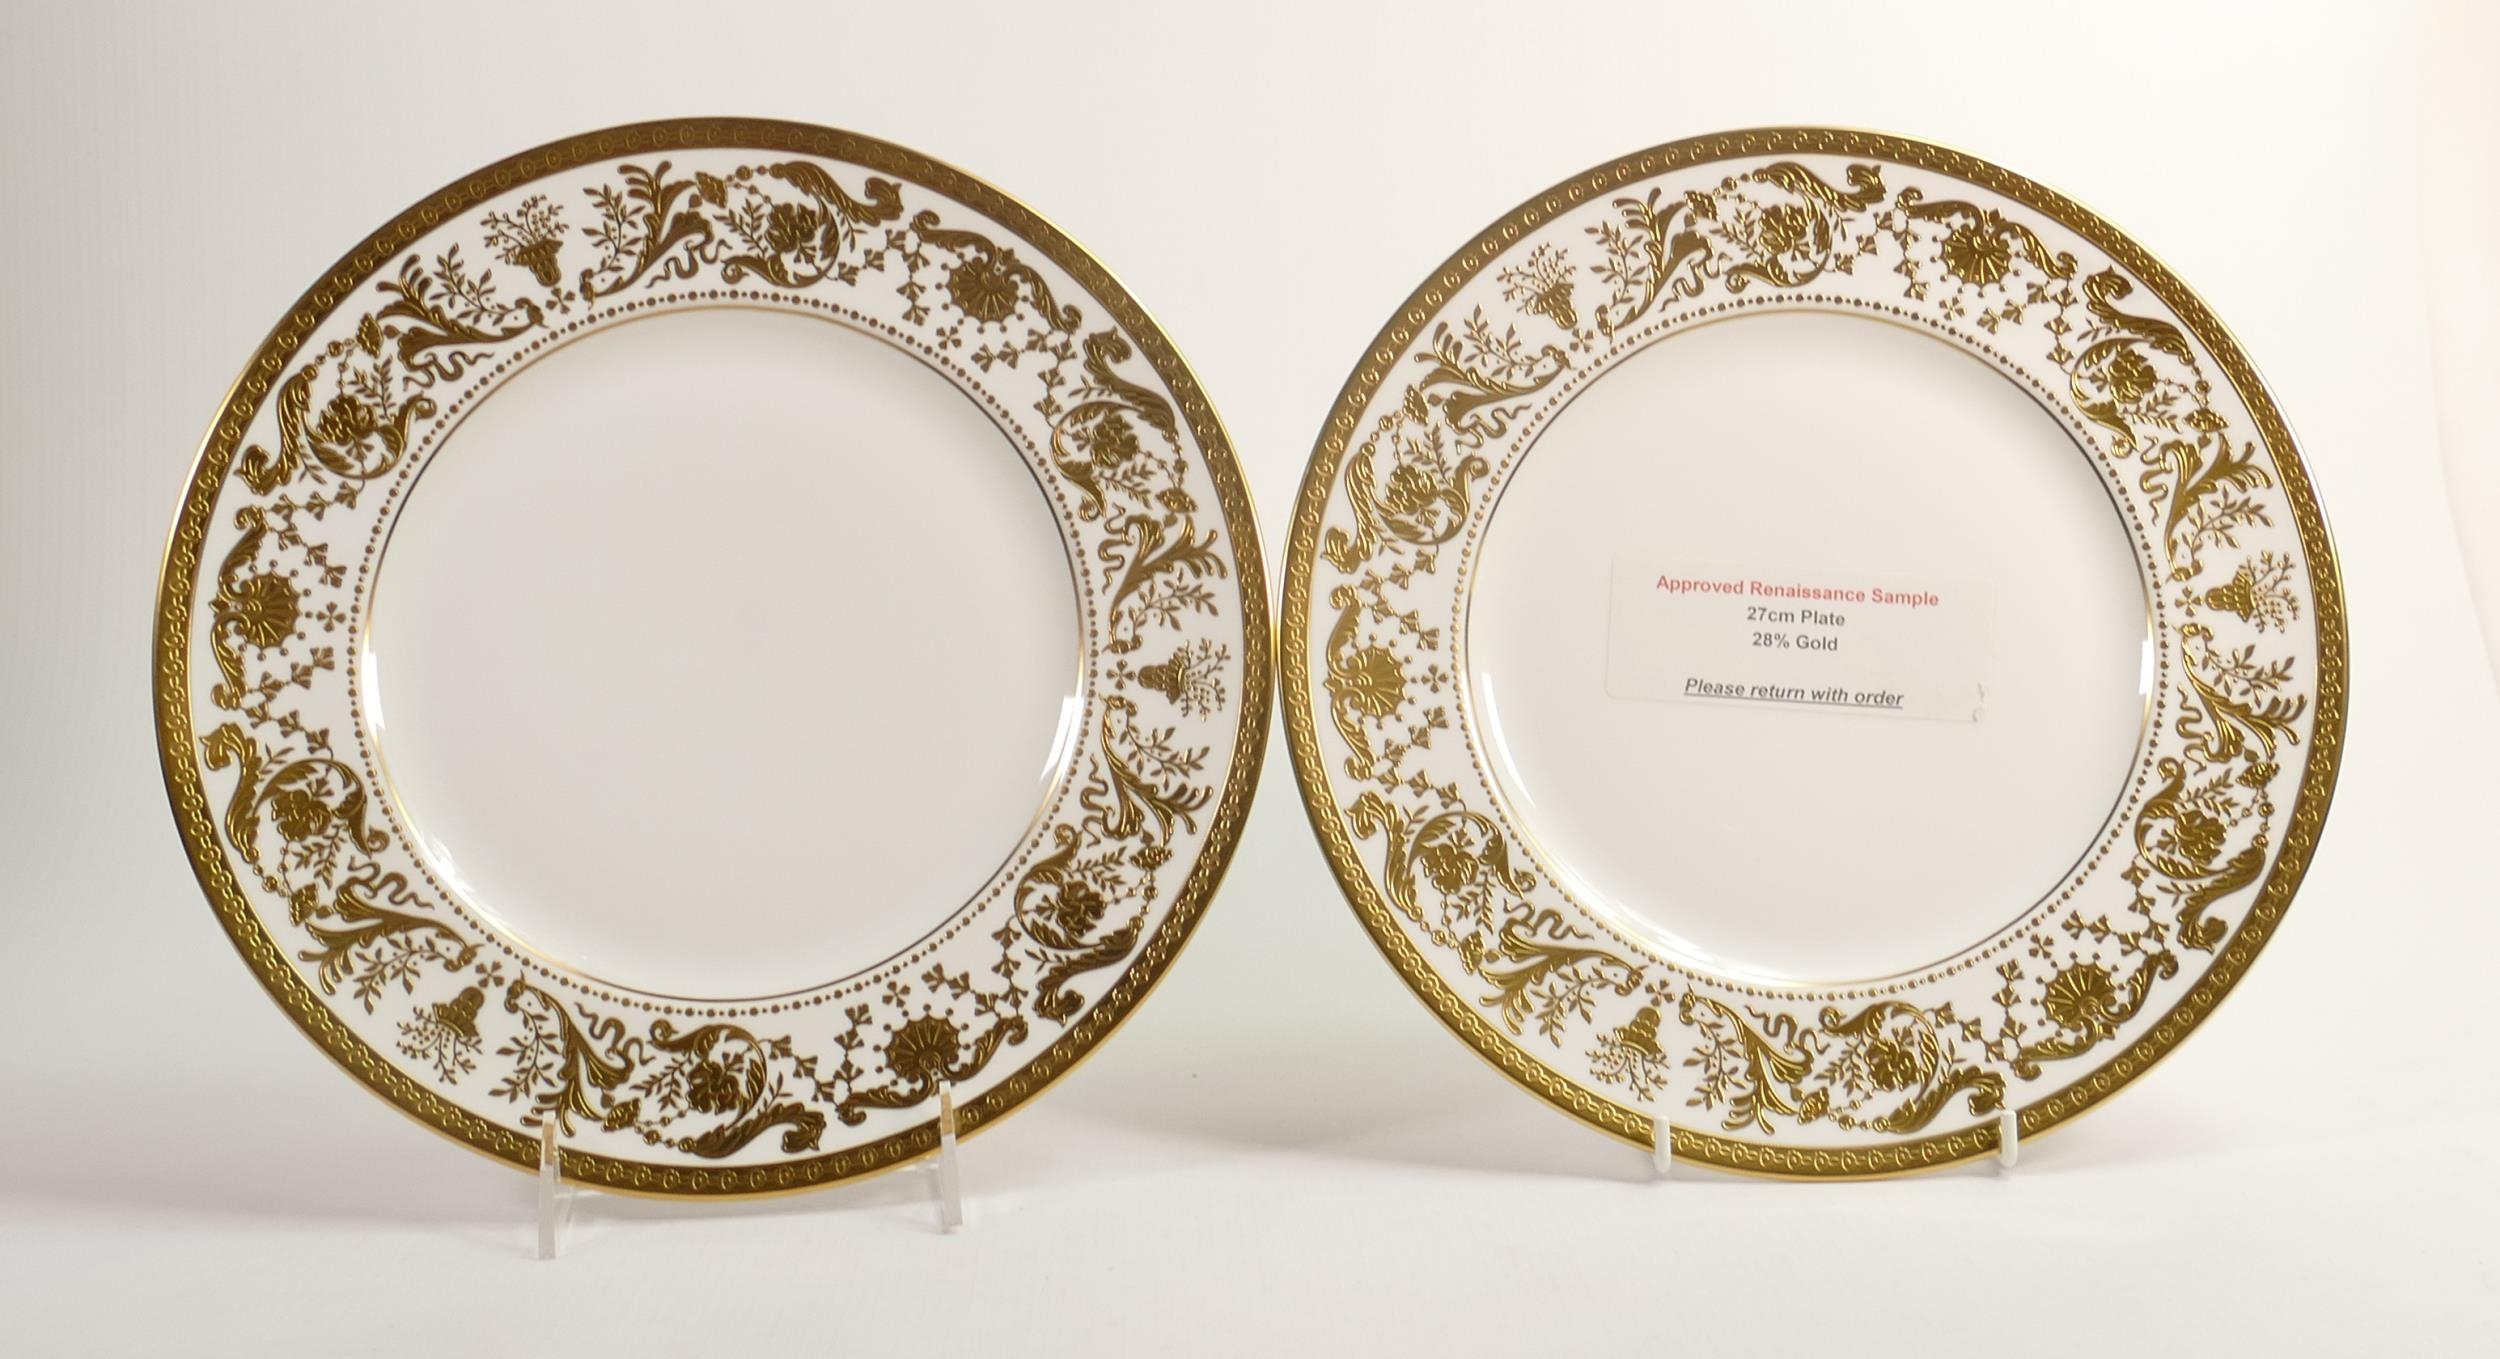 De Lamerie Fine Bone China Renaissance Patterned Dinner Plates , specially made high end quality - Image 3 of 3